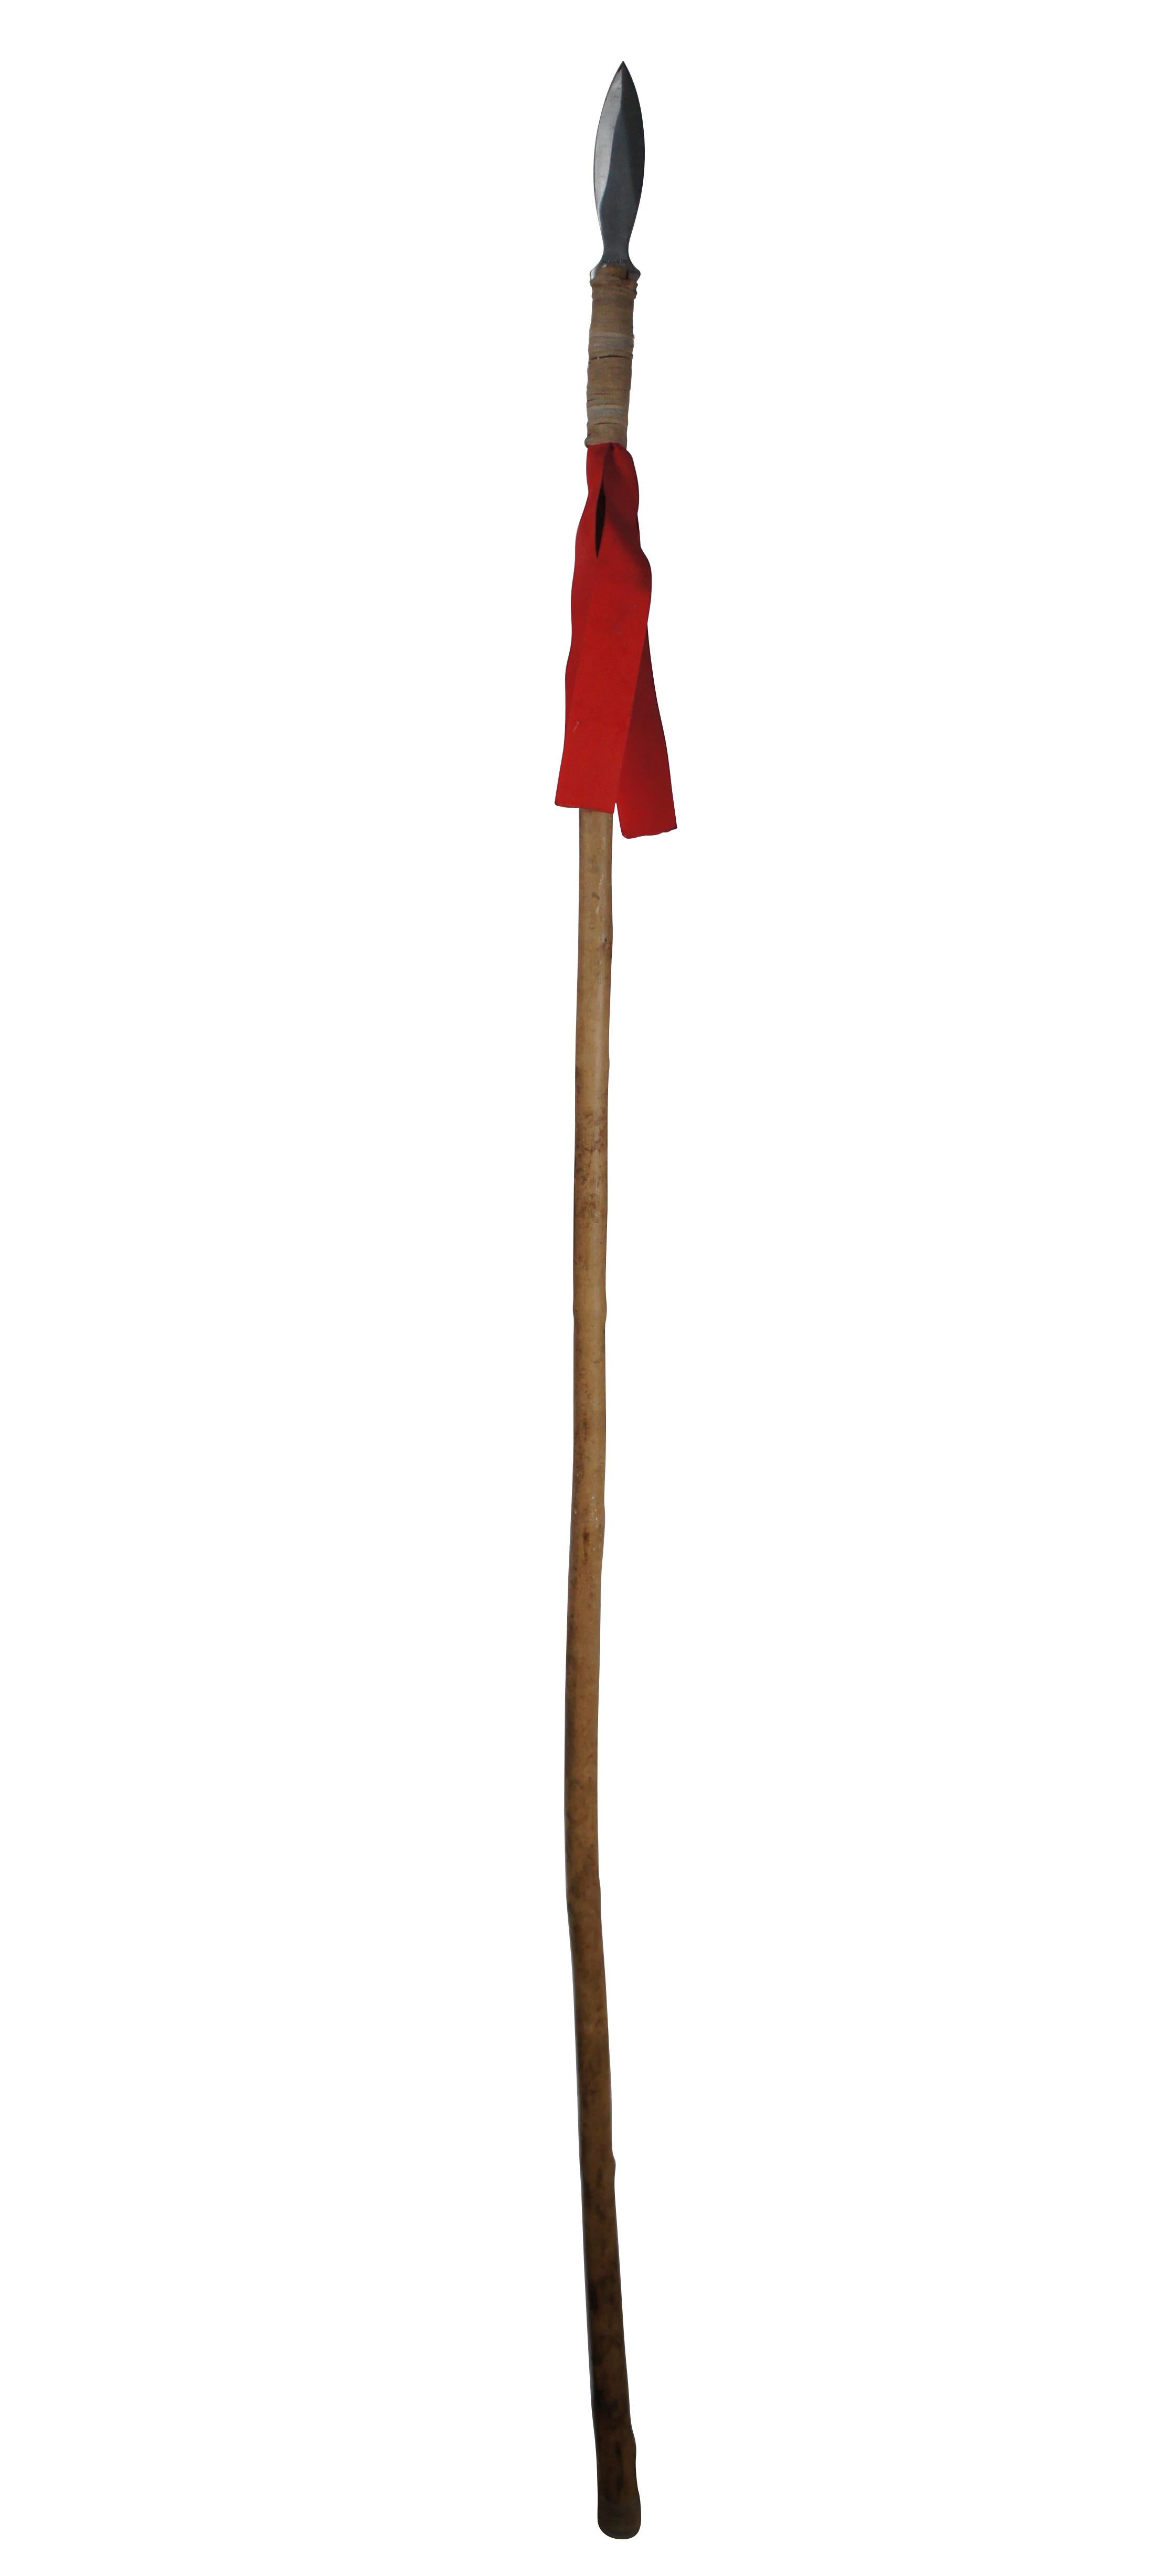 Late 20th century 6 foot long Javelin spear. 440 Stainless steel leaf shaped tip on a natural wood branch wrapped with leather cord and decorated with red grosgrain ribbons.

Dimensions:
1.5